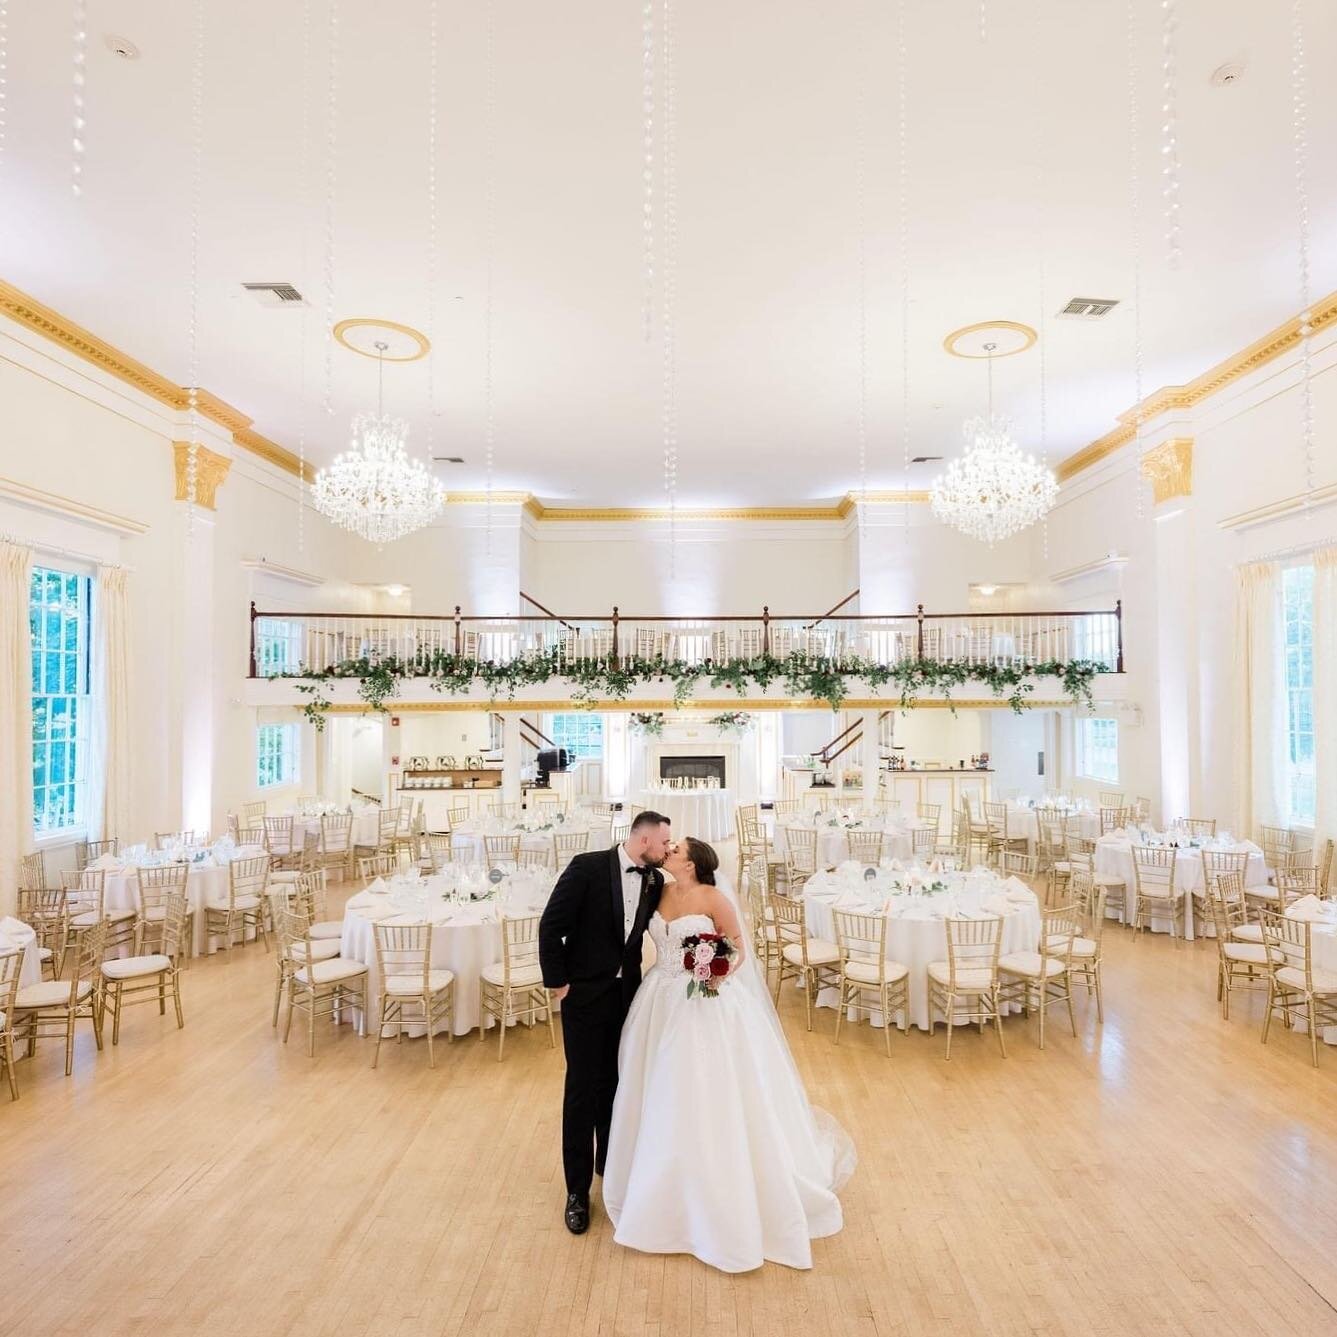 A crisp, neutral and romantic ballroom to celebrate any event, and any color scheme. 

Inquire today for any remaining 2023 dates. Our 2024 books are open and we are ready to show you around our spectacular venue.
📸 @paneraibarry 
💐 @karlacassidyde